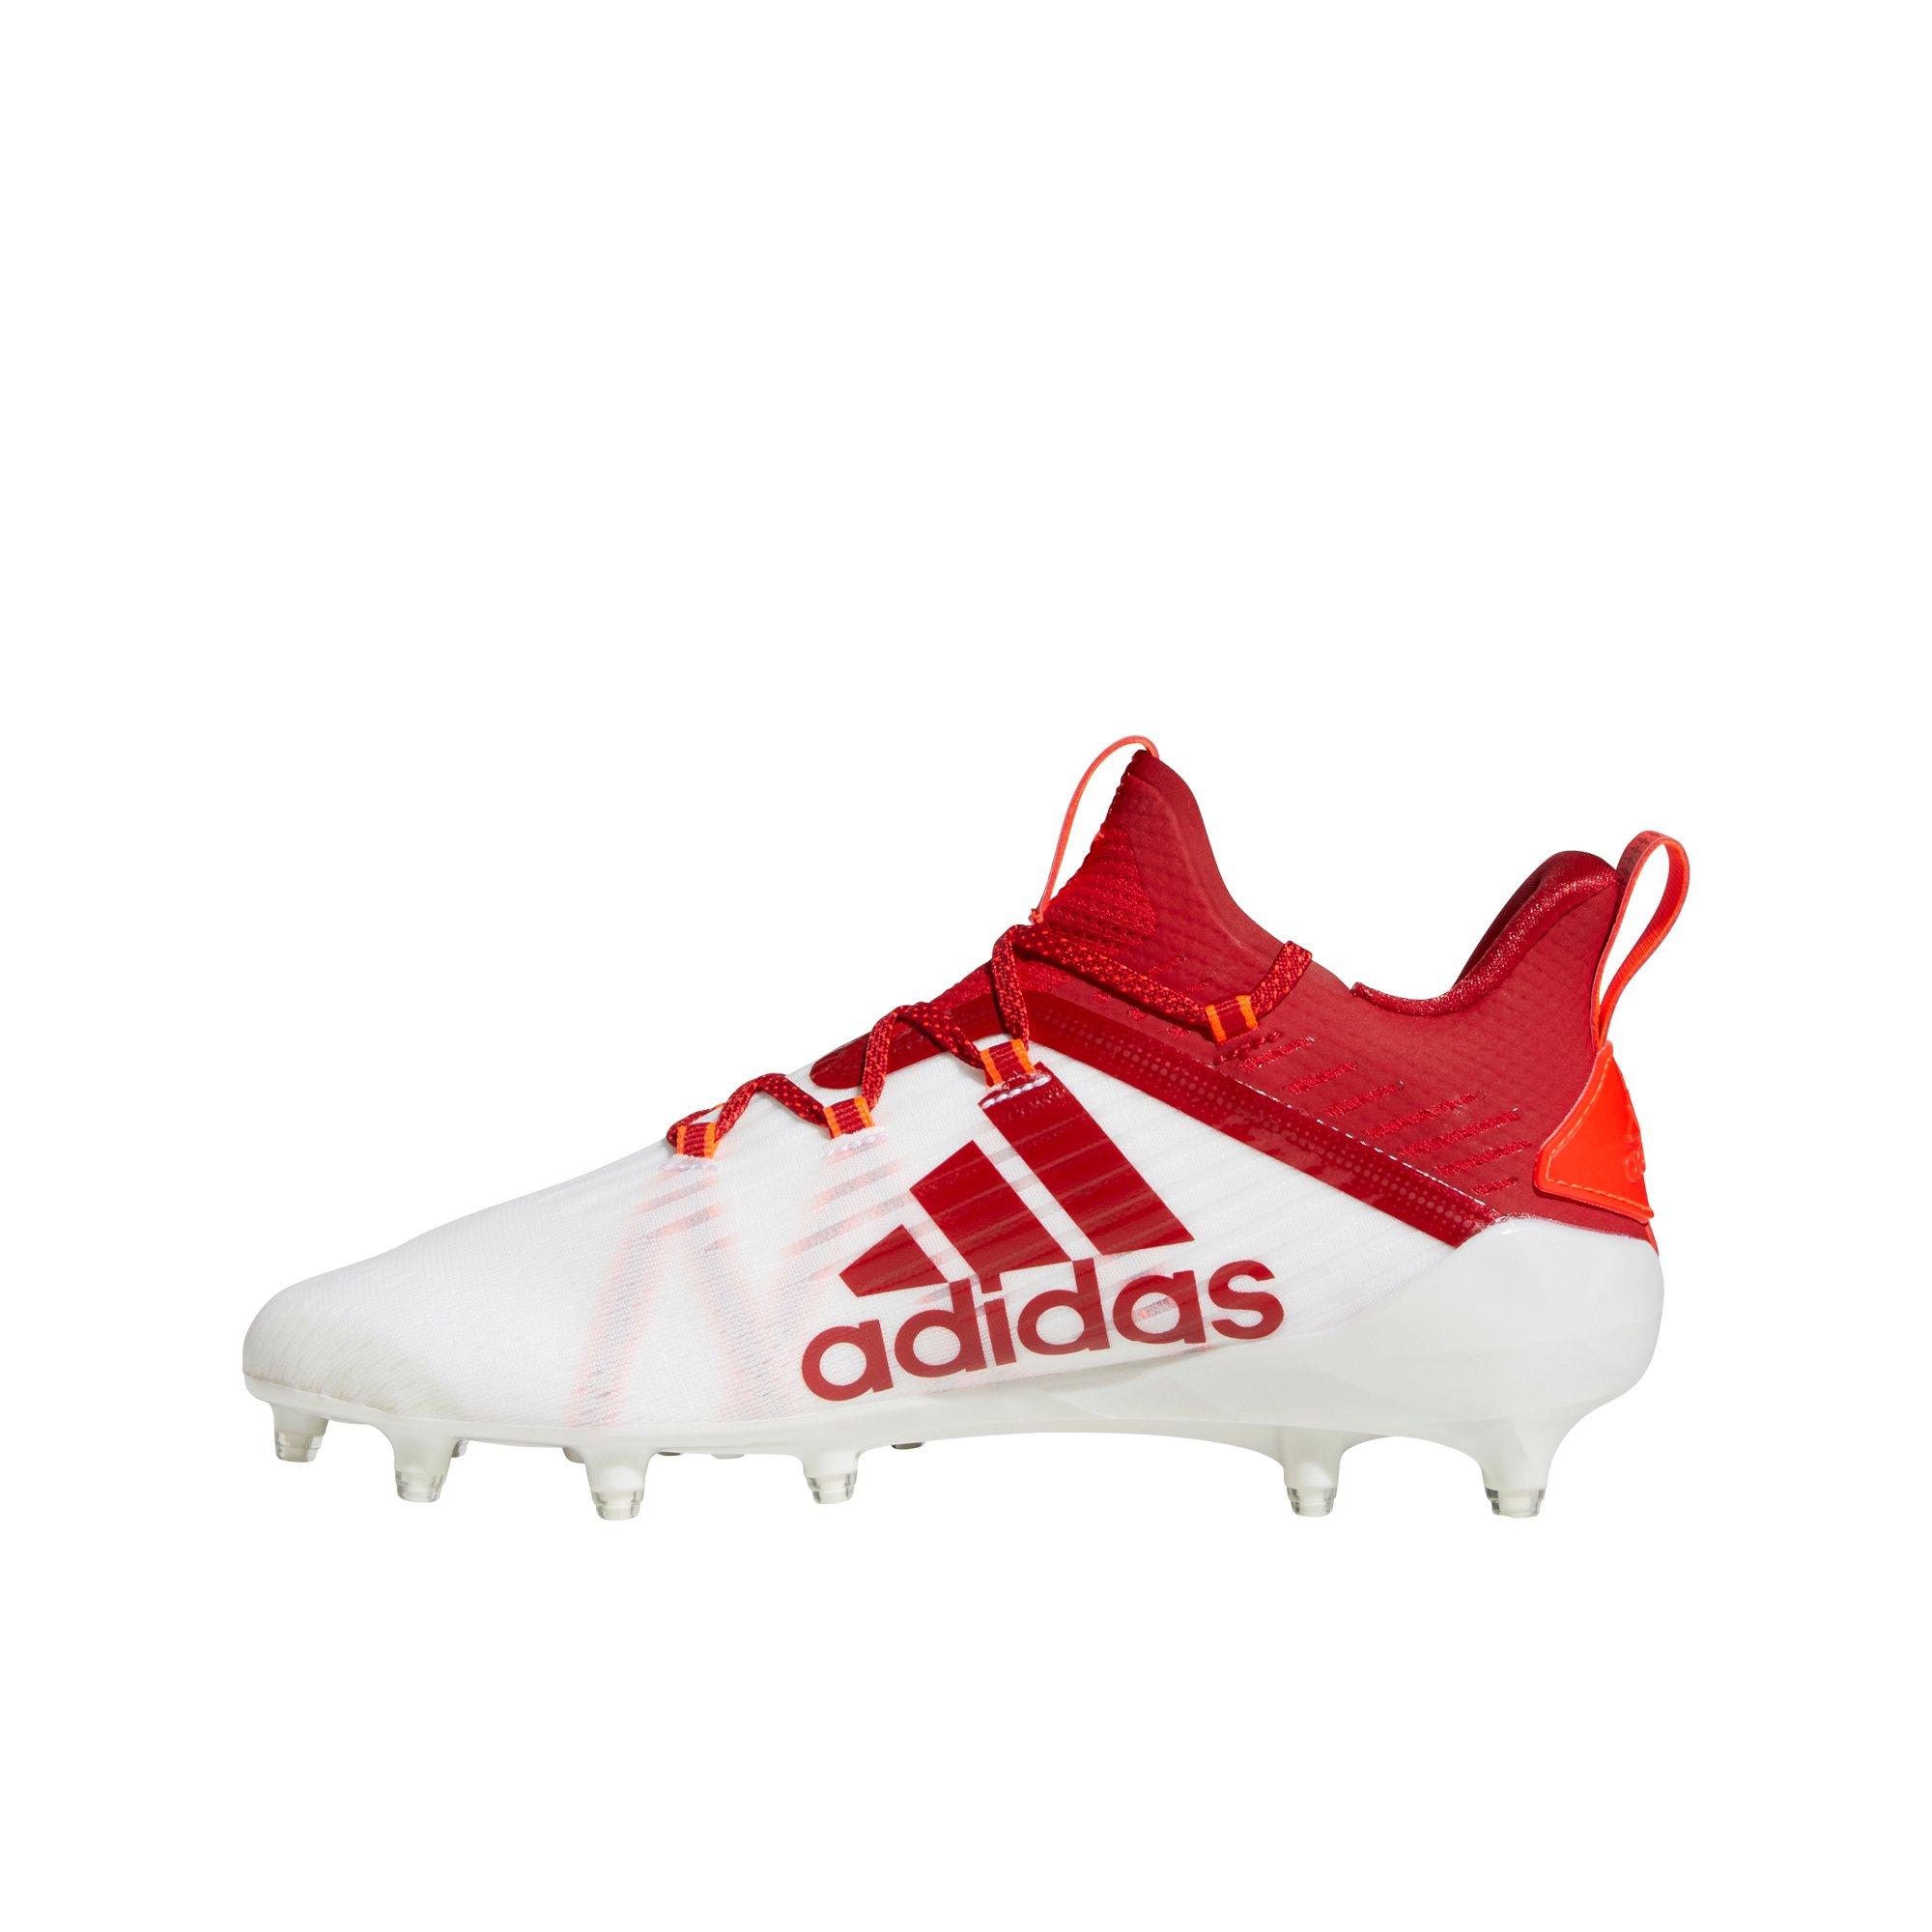 red adidas cleats football